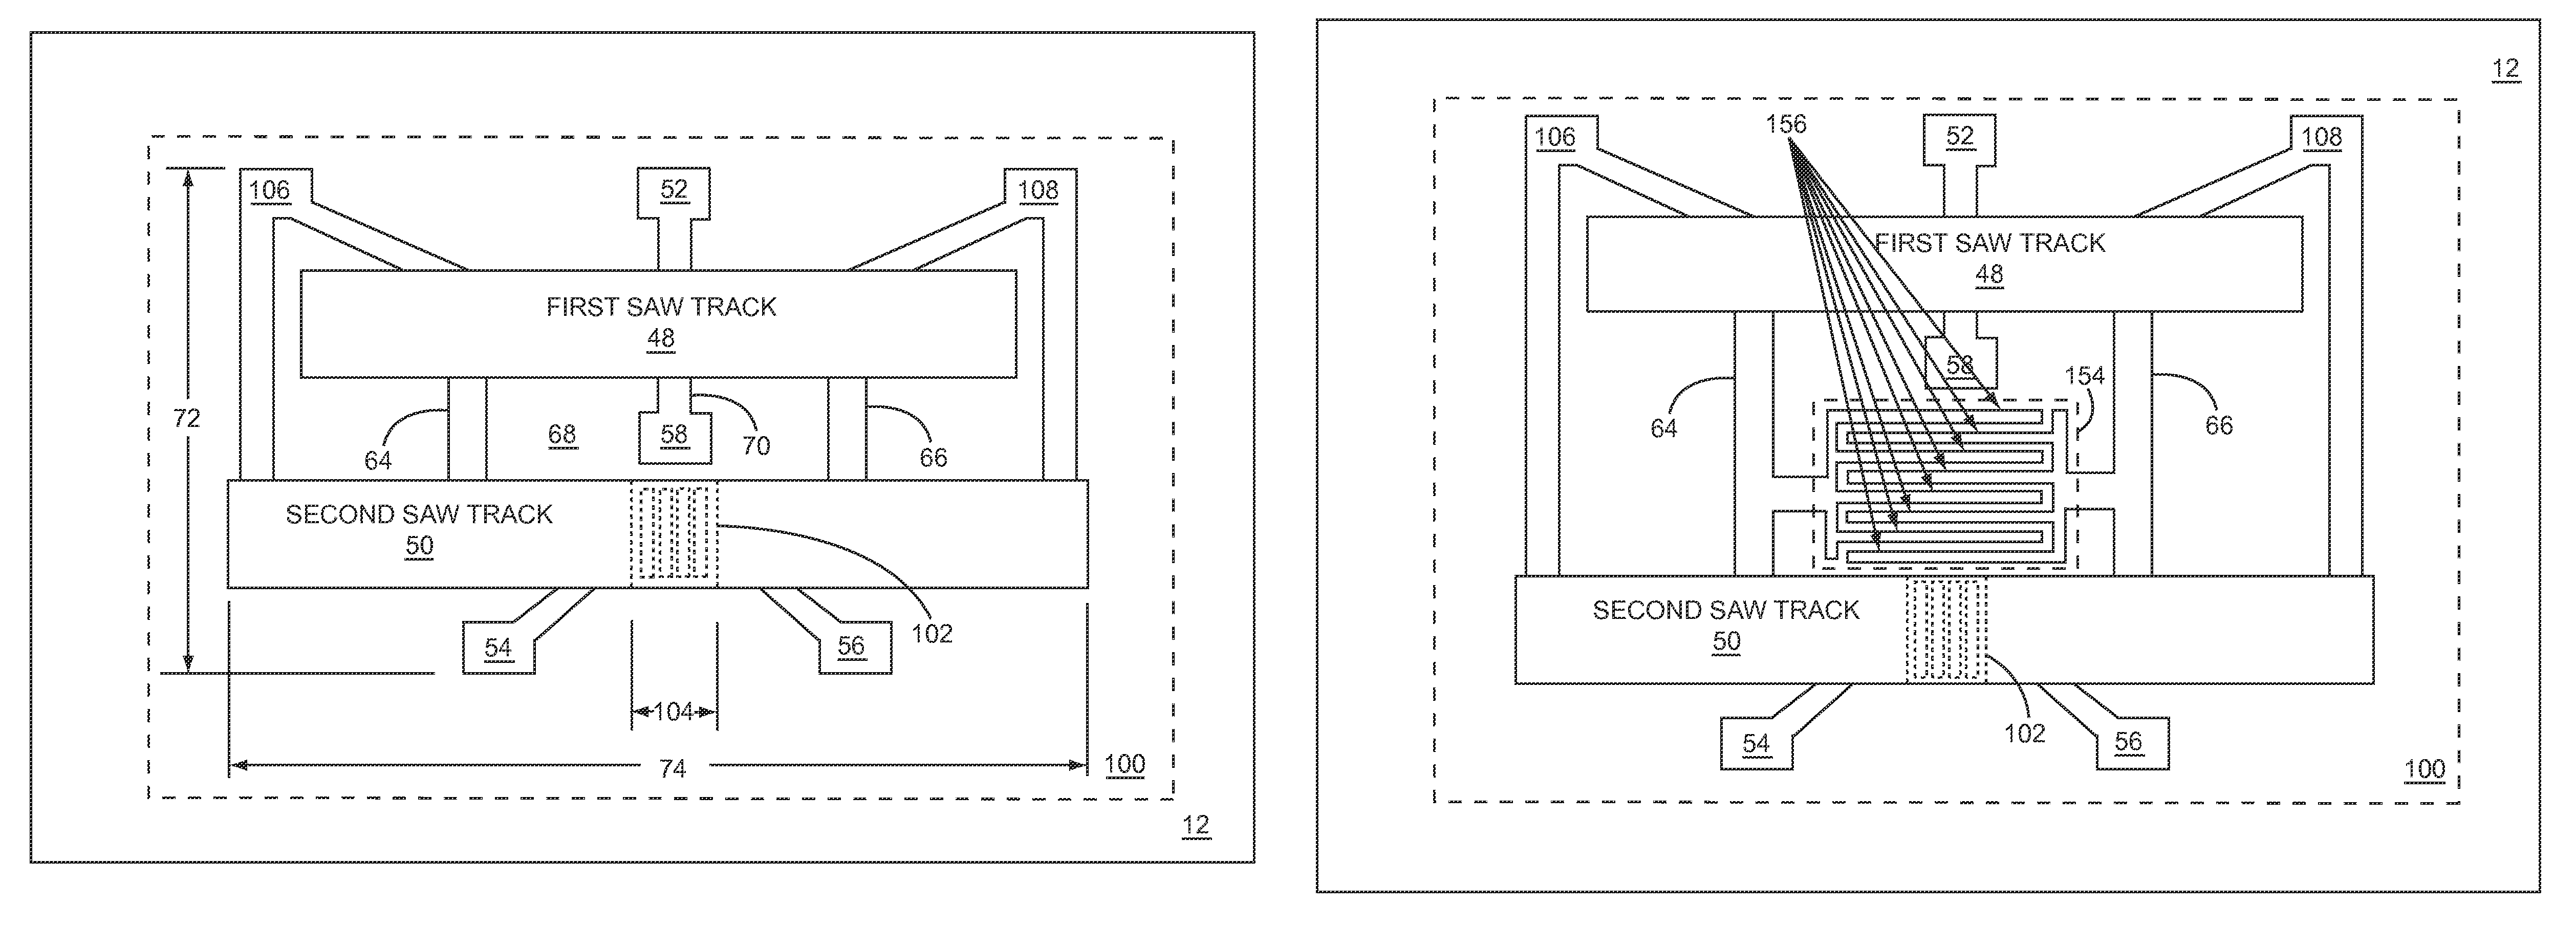 Two-track surface acoustic wave device with interconnecting grating